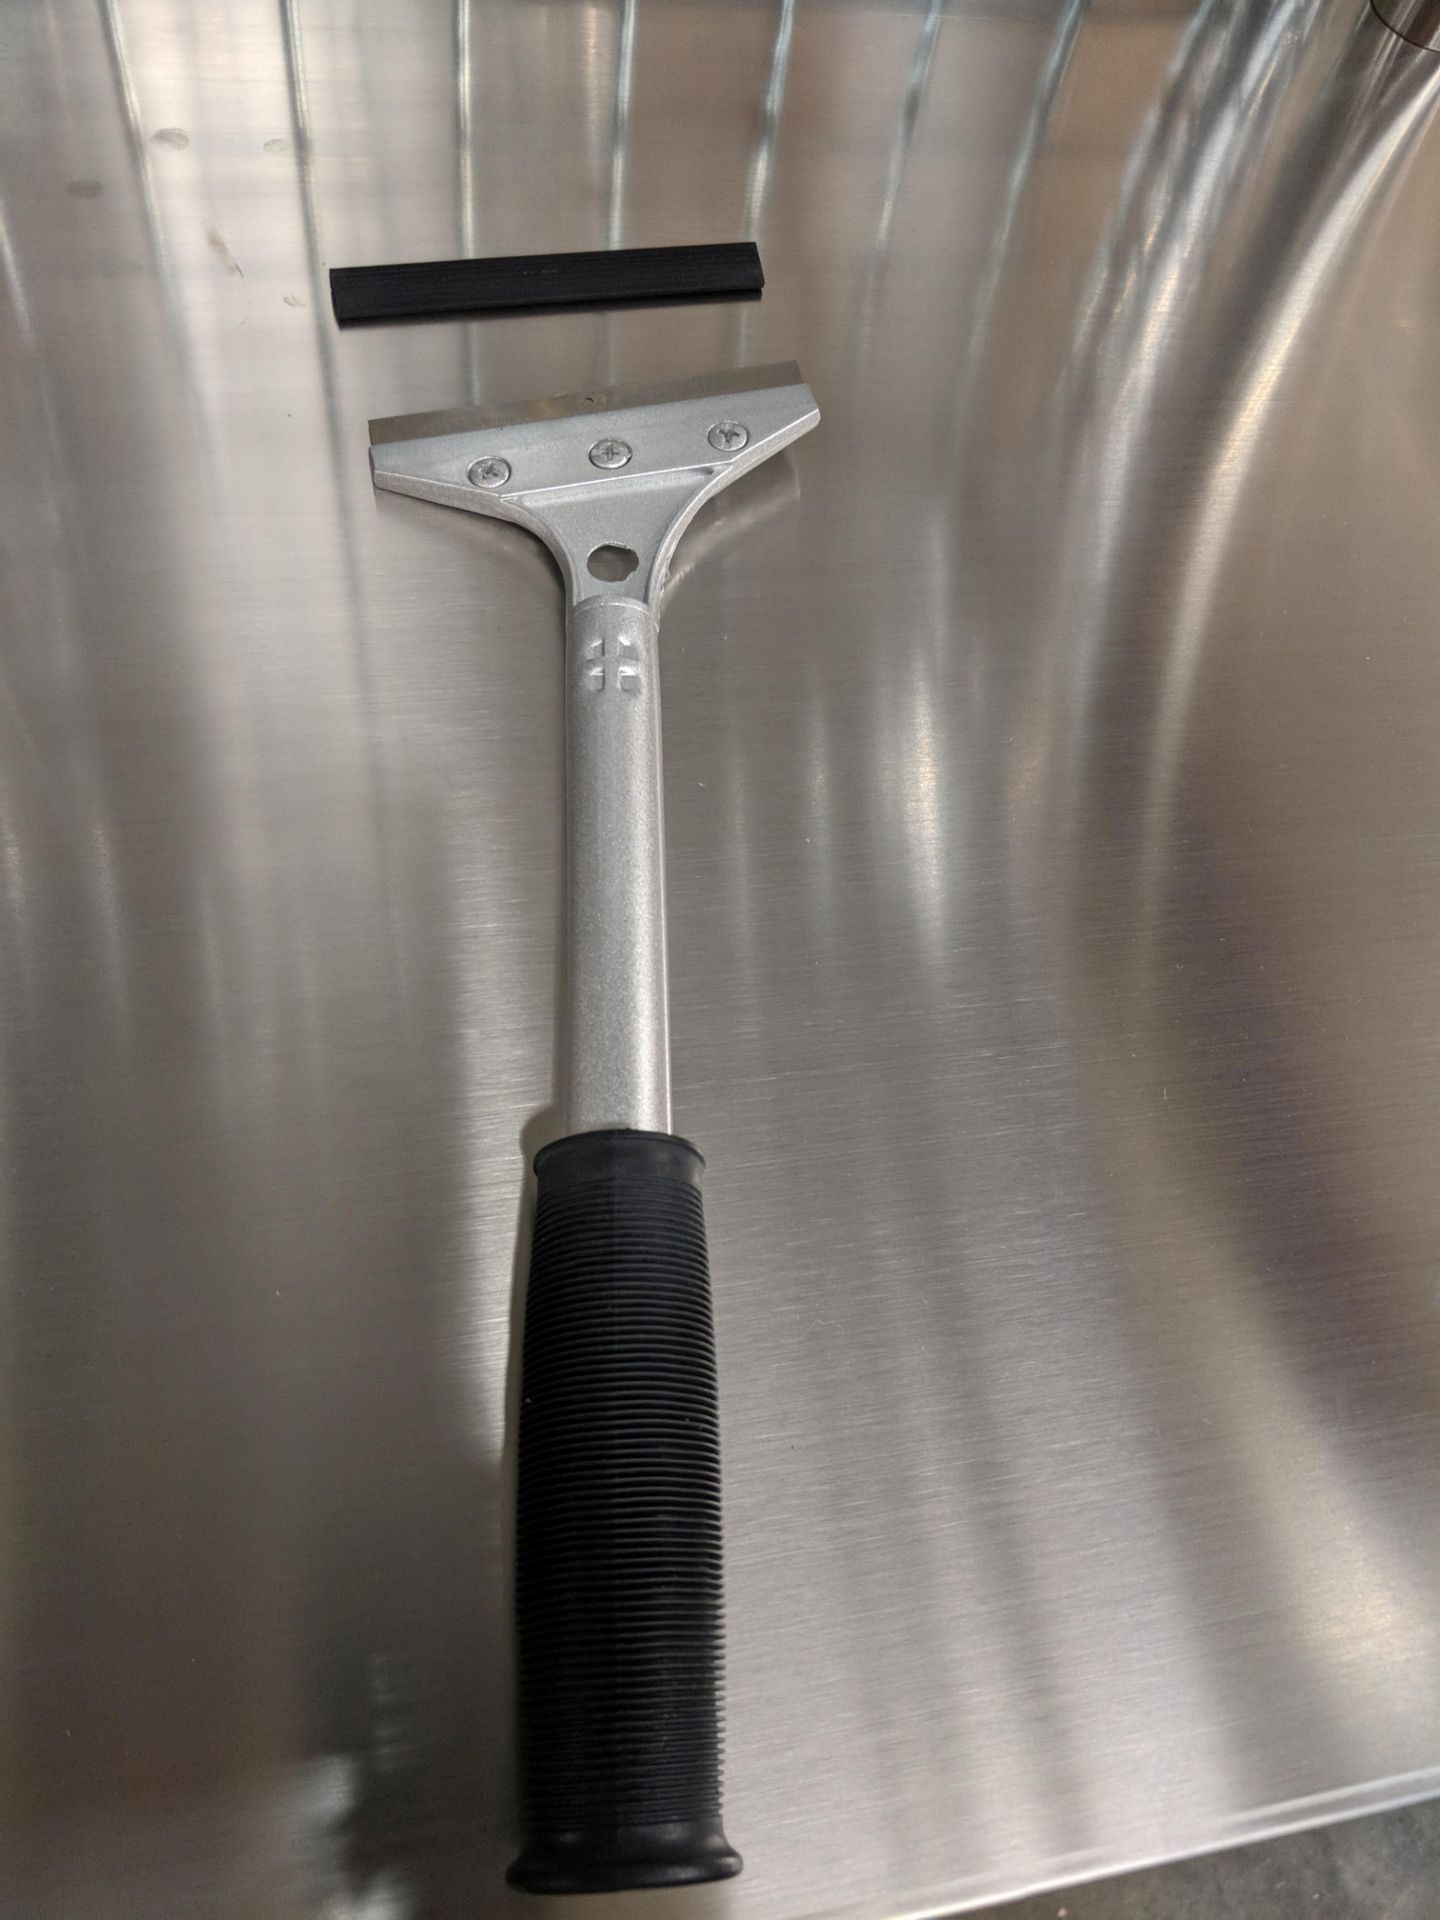 Aluminum 12" Griddle Scraper with Rubber Handle - Image 2 of 3